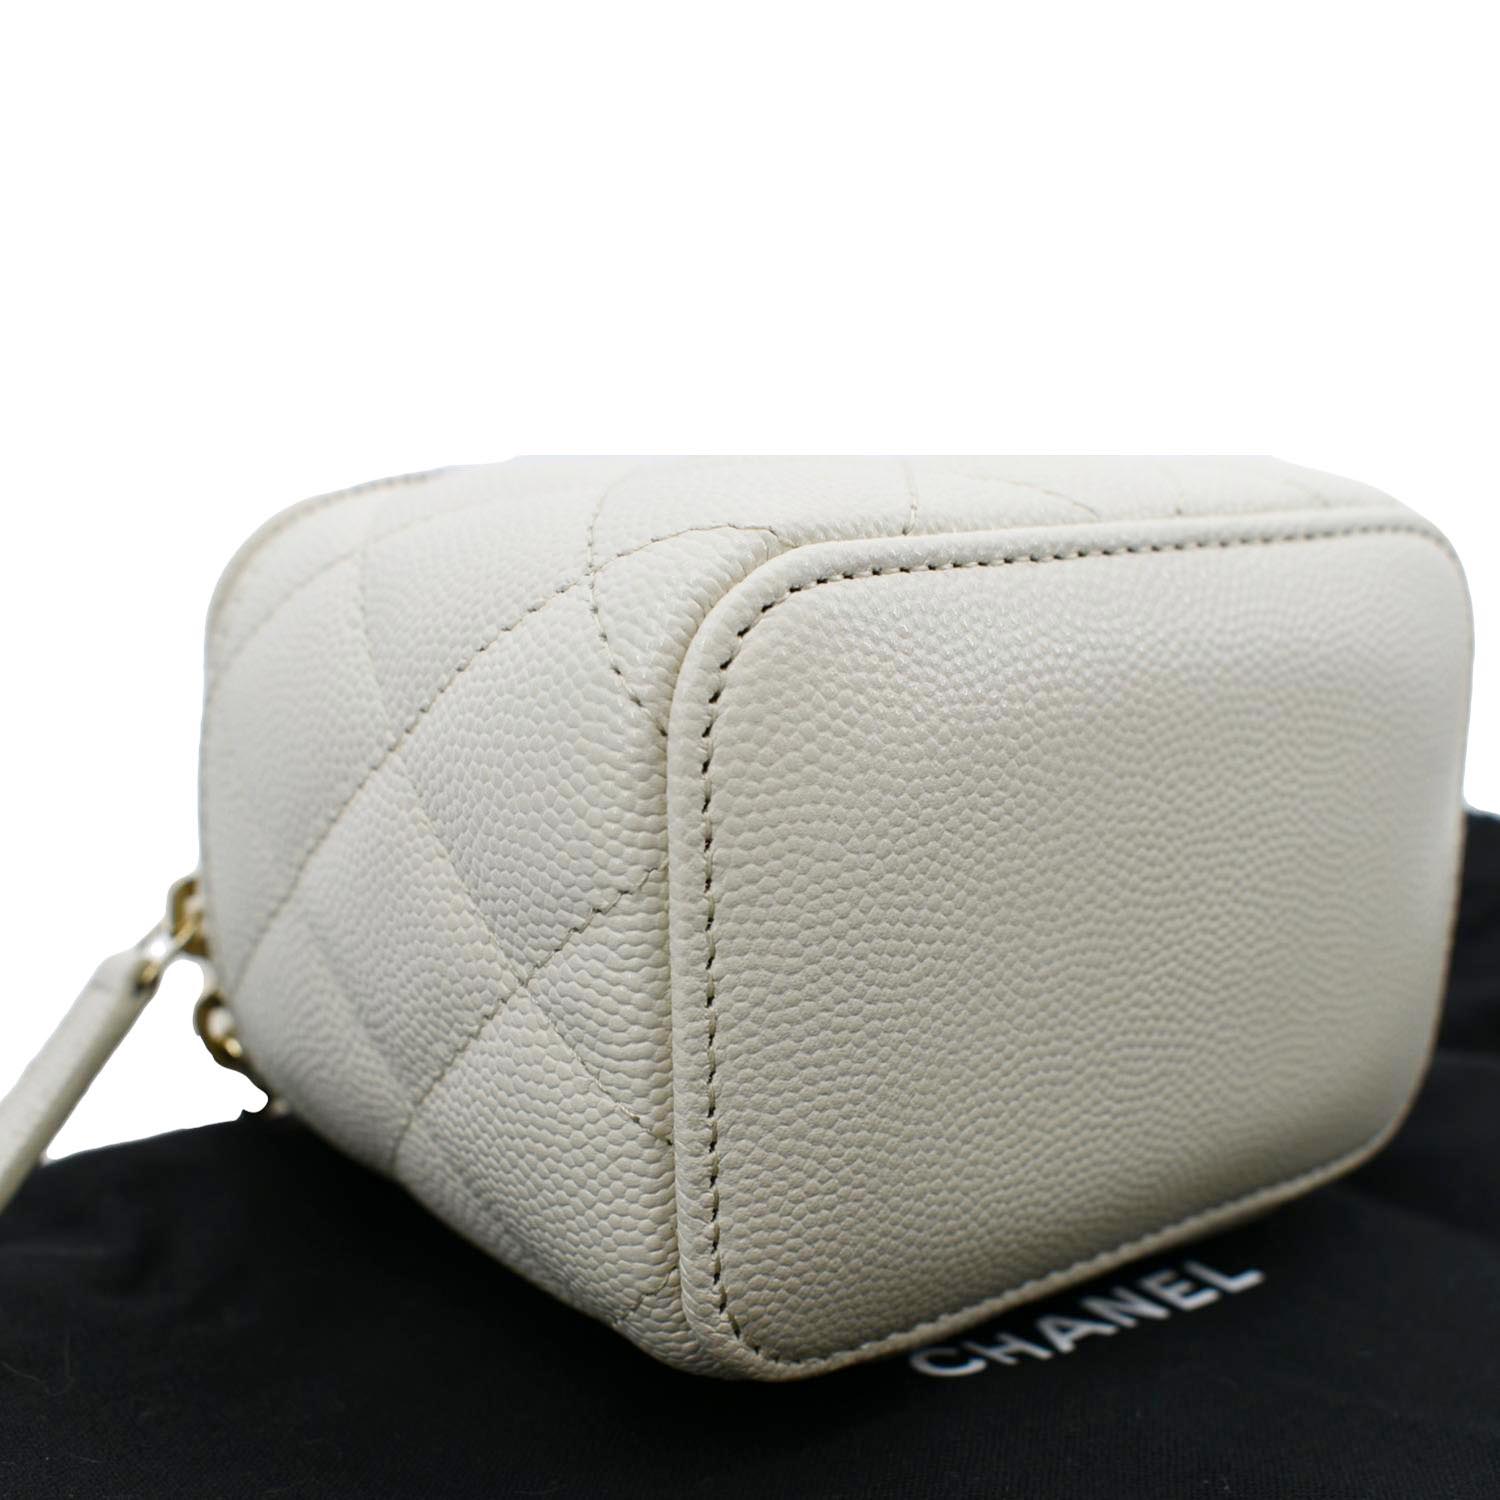 CHANEL Vanity Case Quilted Leather Crossbody Bag White